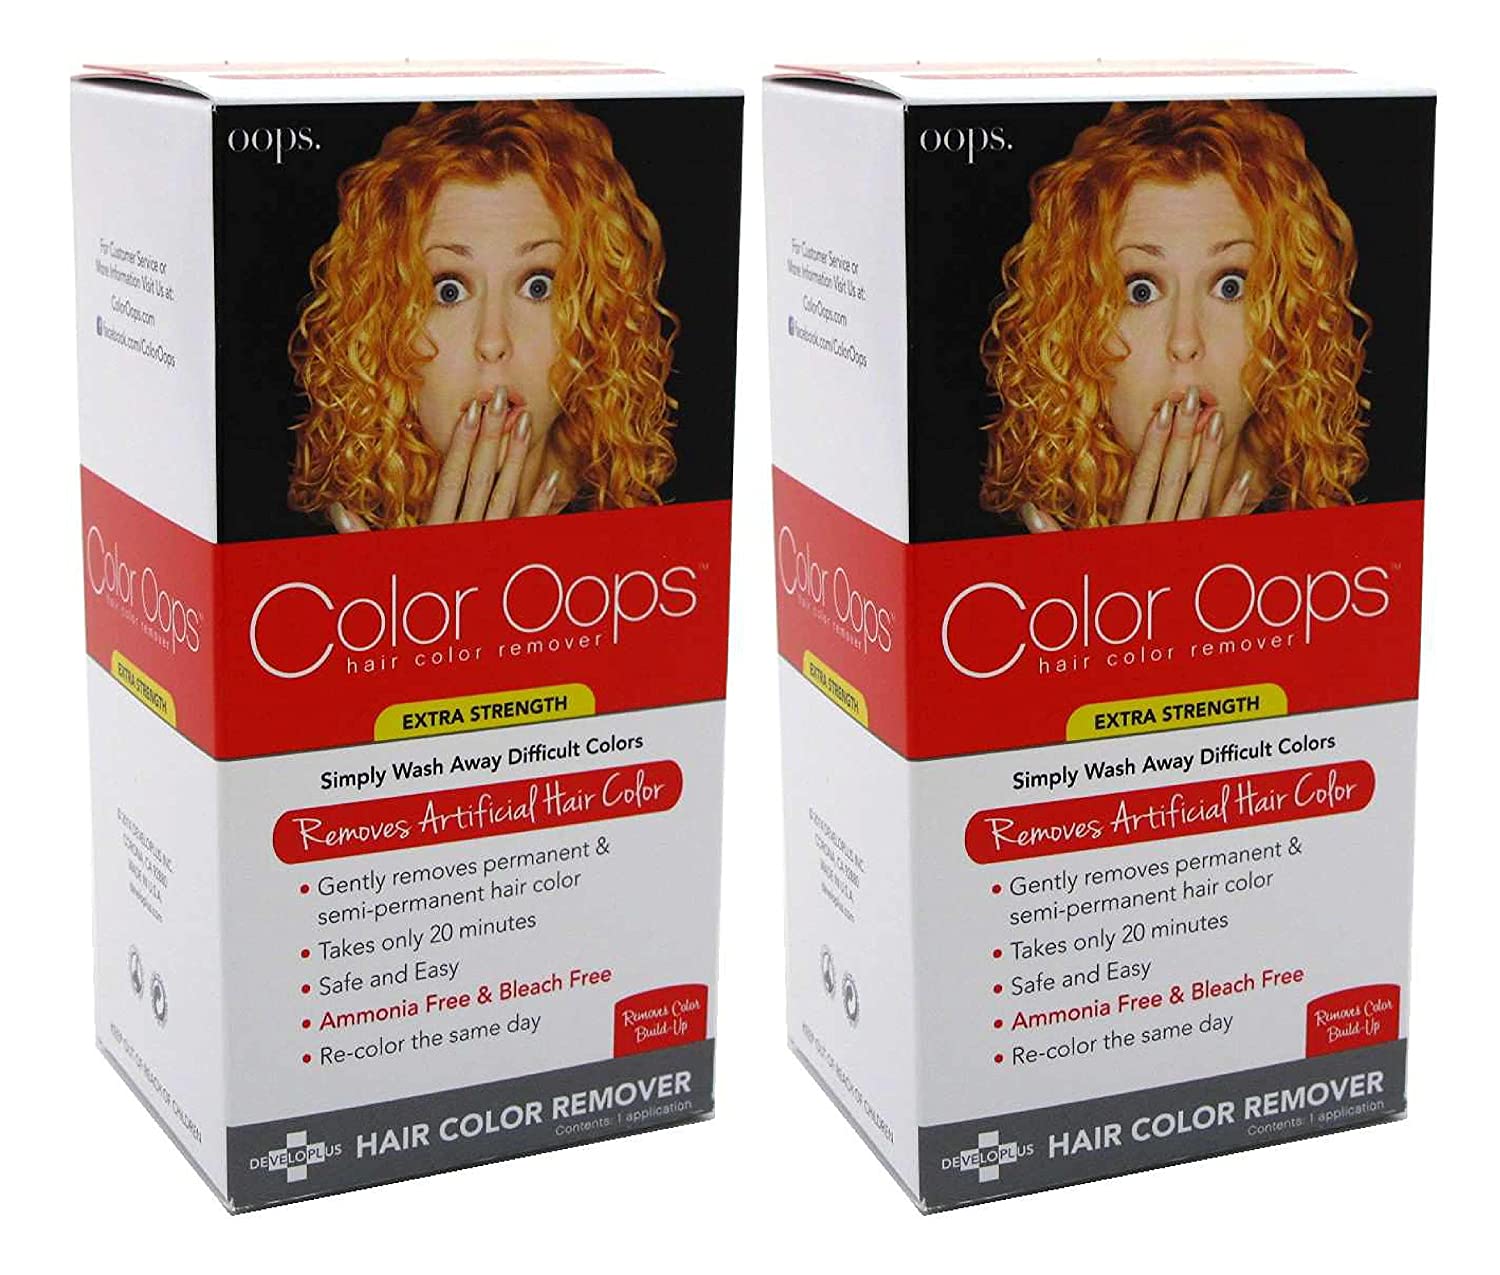 Color Oops hair color remover